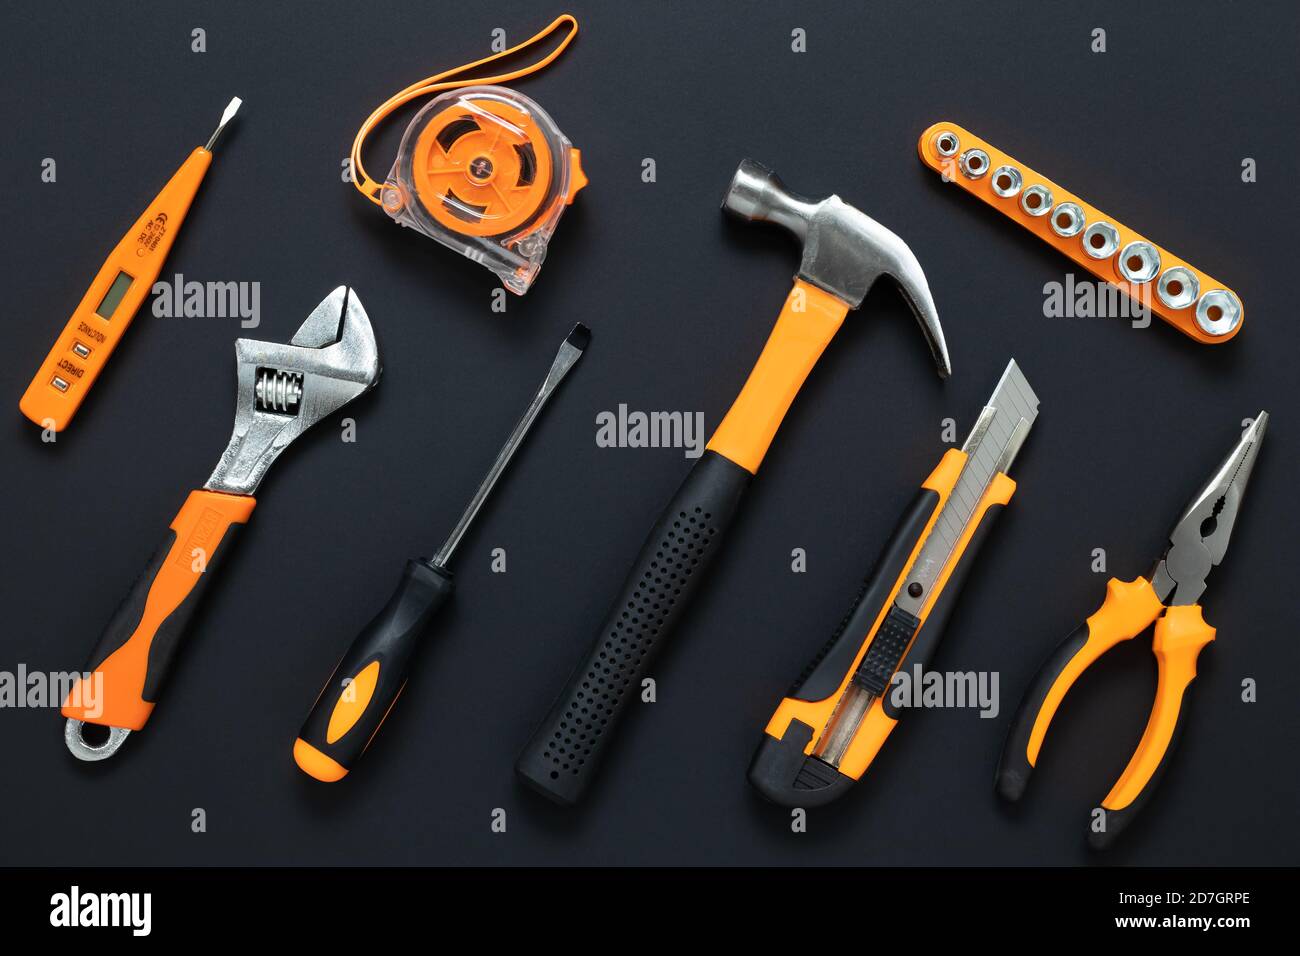 Set of tools on black background. Construction, DIY concept. Equipment,  workplace. Flat lay composition. Screwdriver, tape measure, wrench, knife, ha Stock Photo